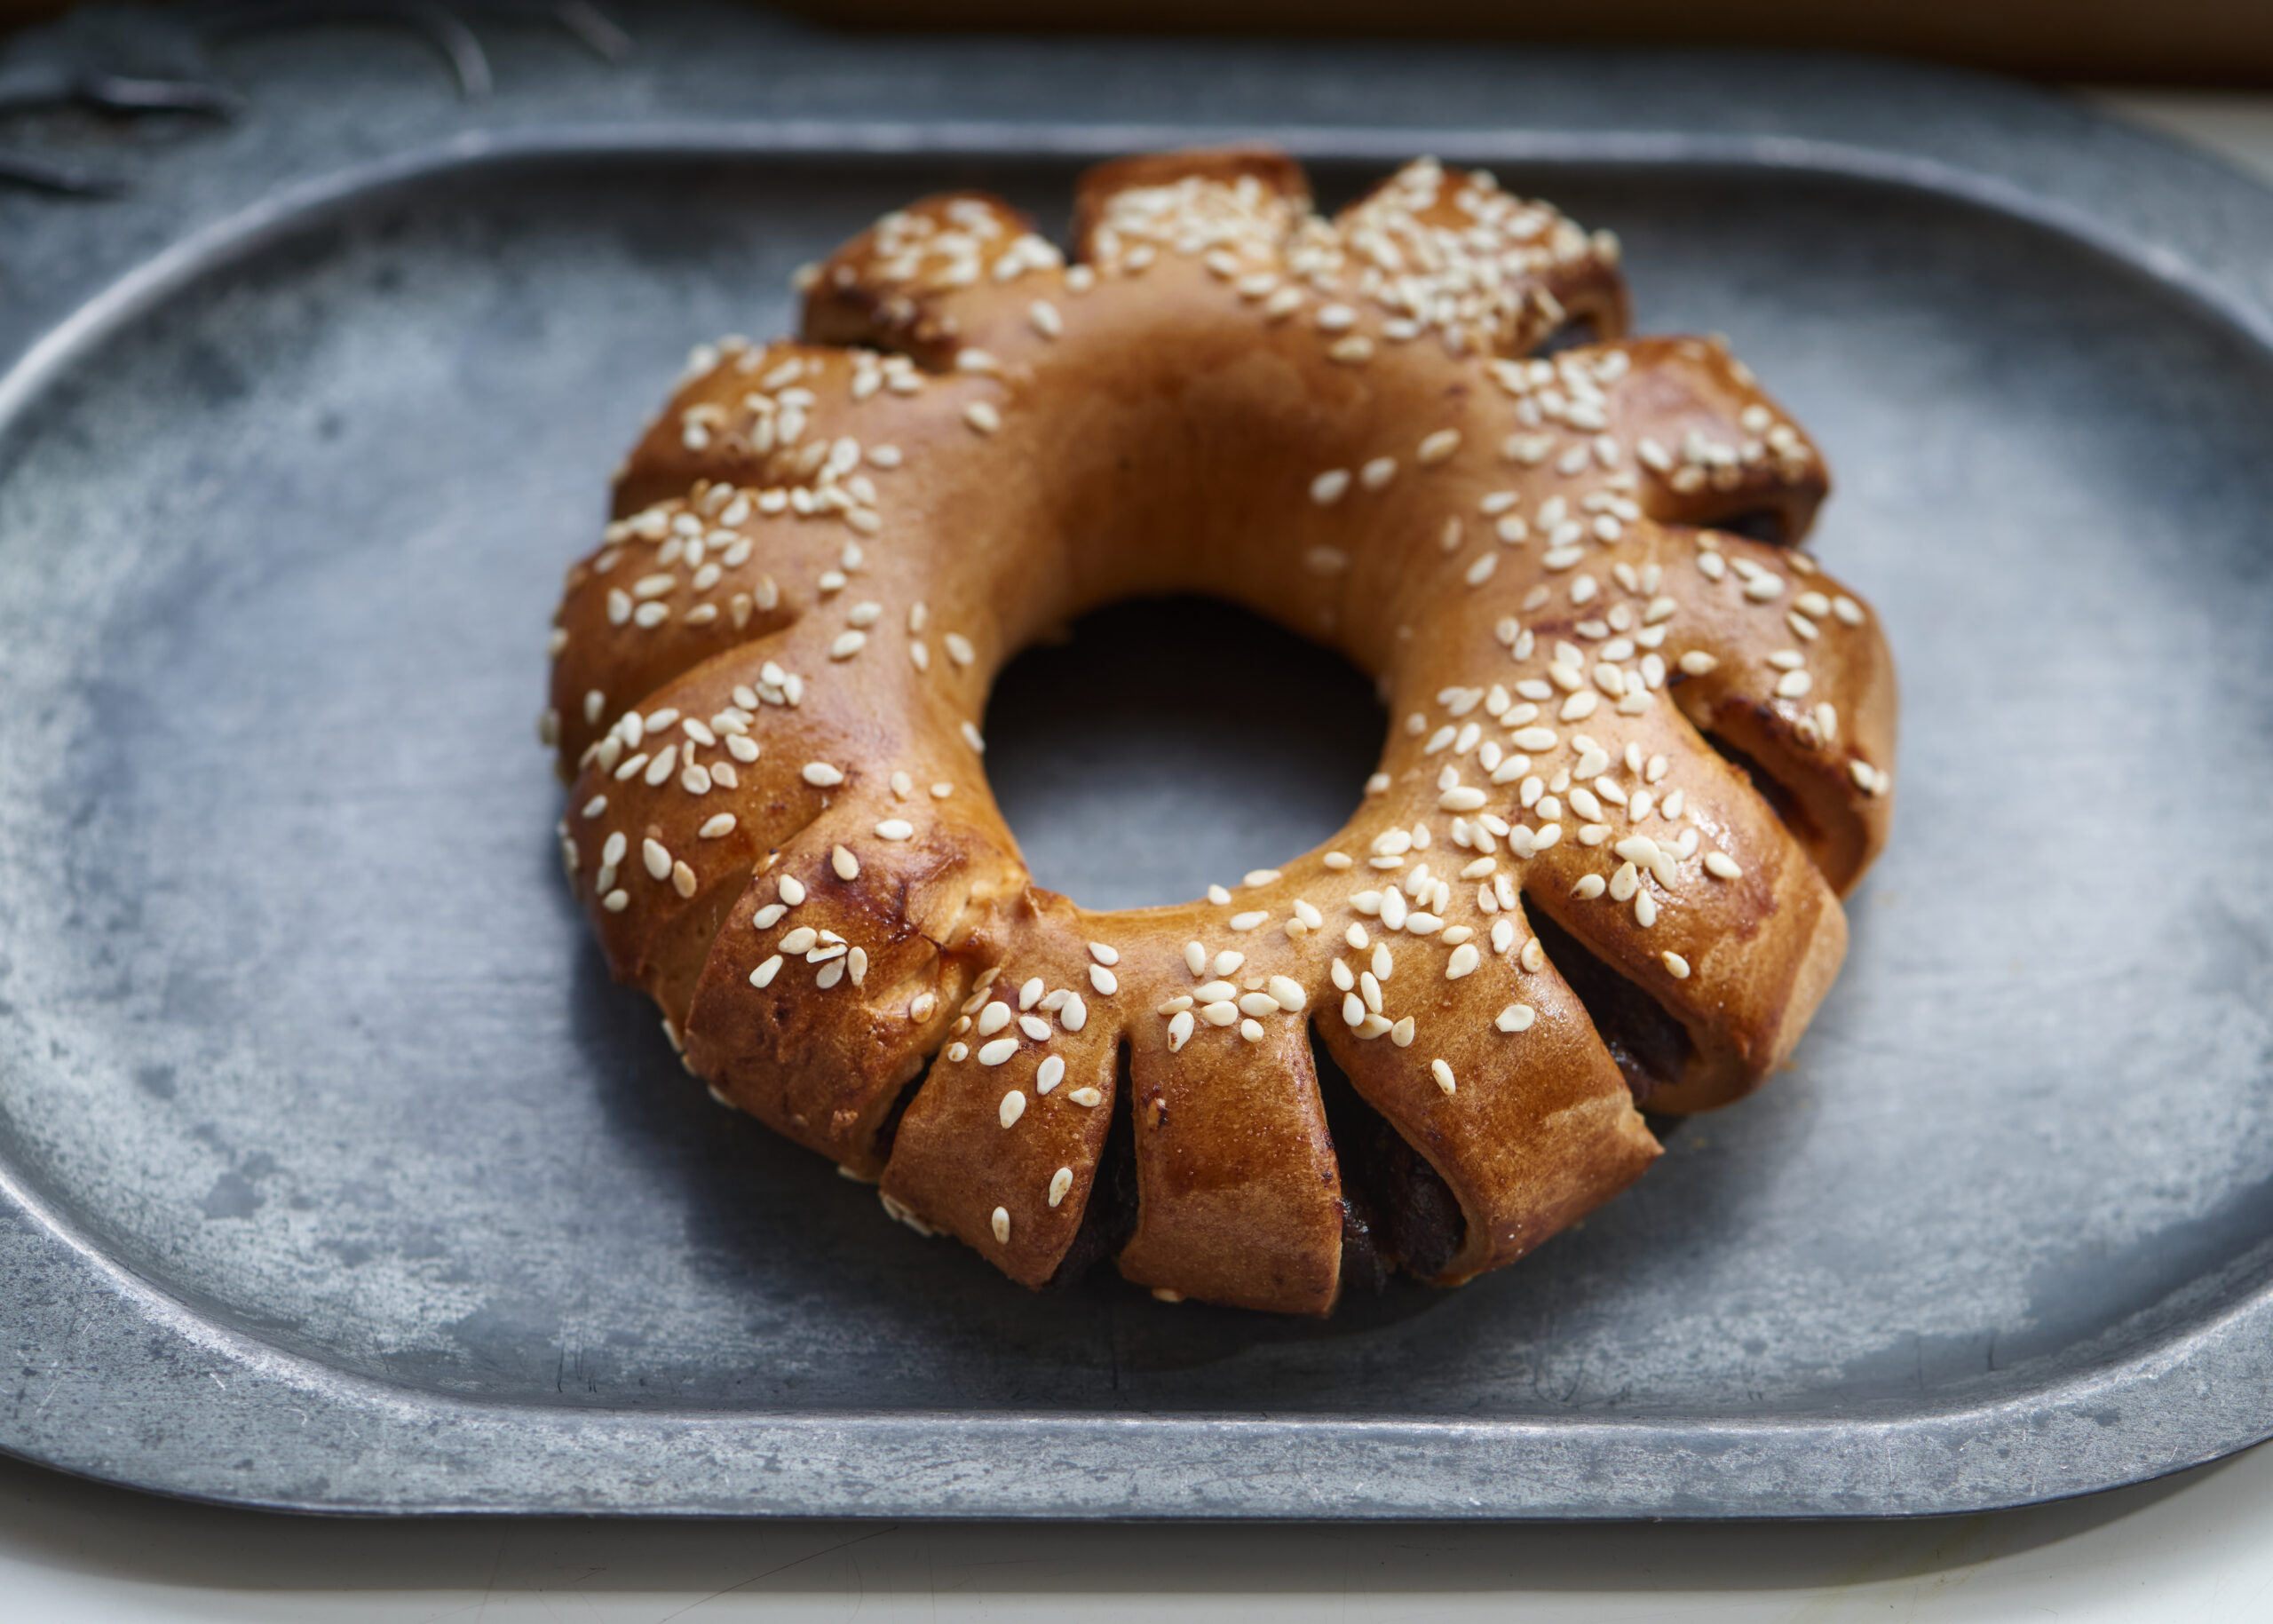 Ring-shaped pastry with sesame seeds on gray tray